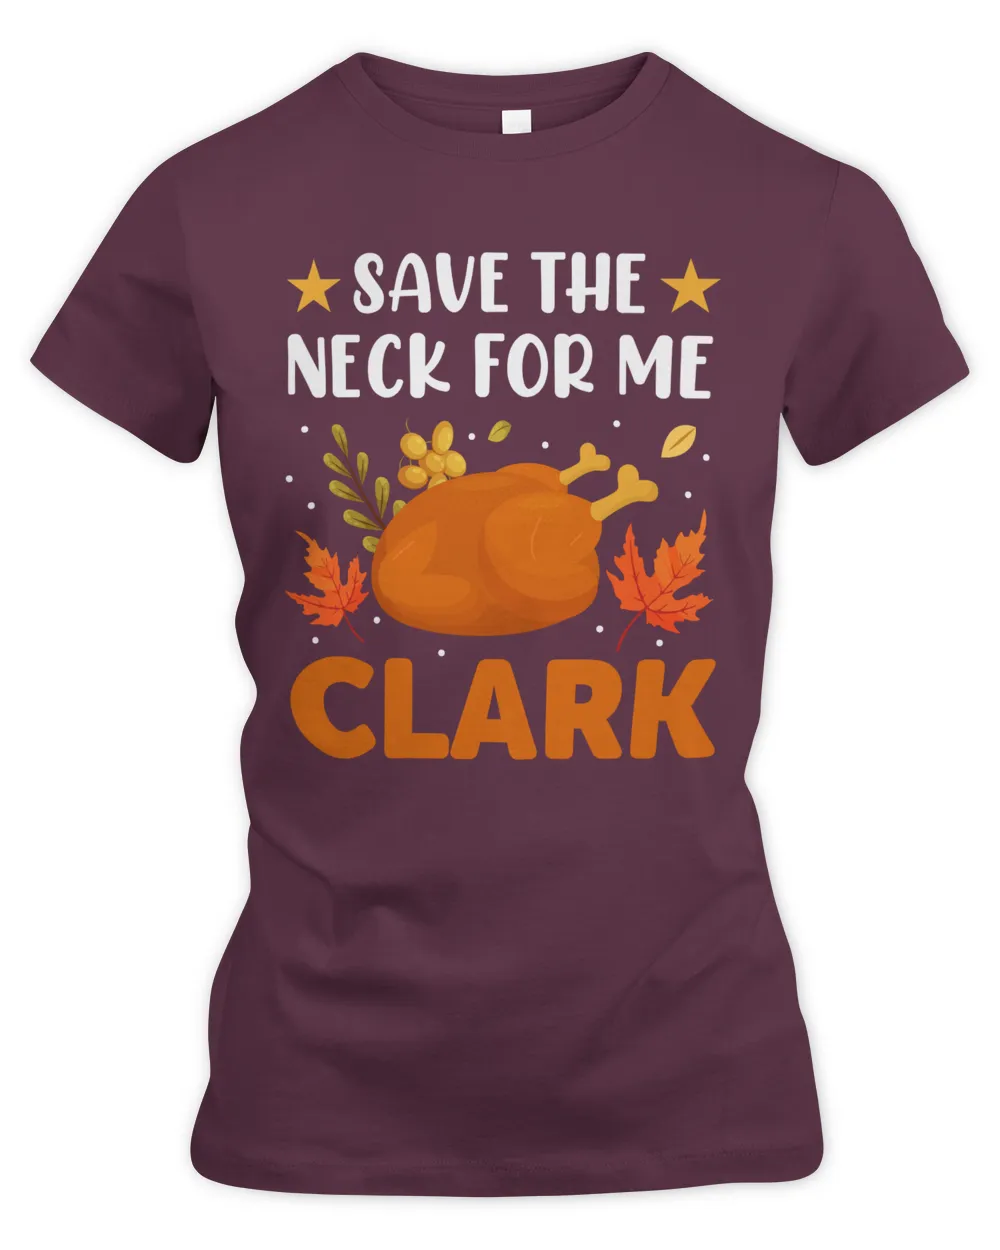 Save the neck for me clark